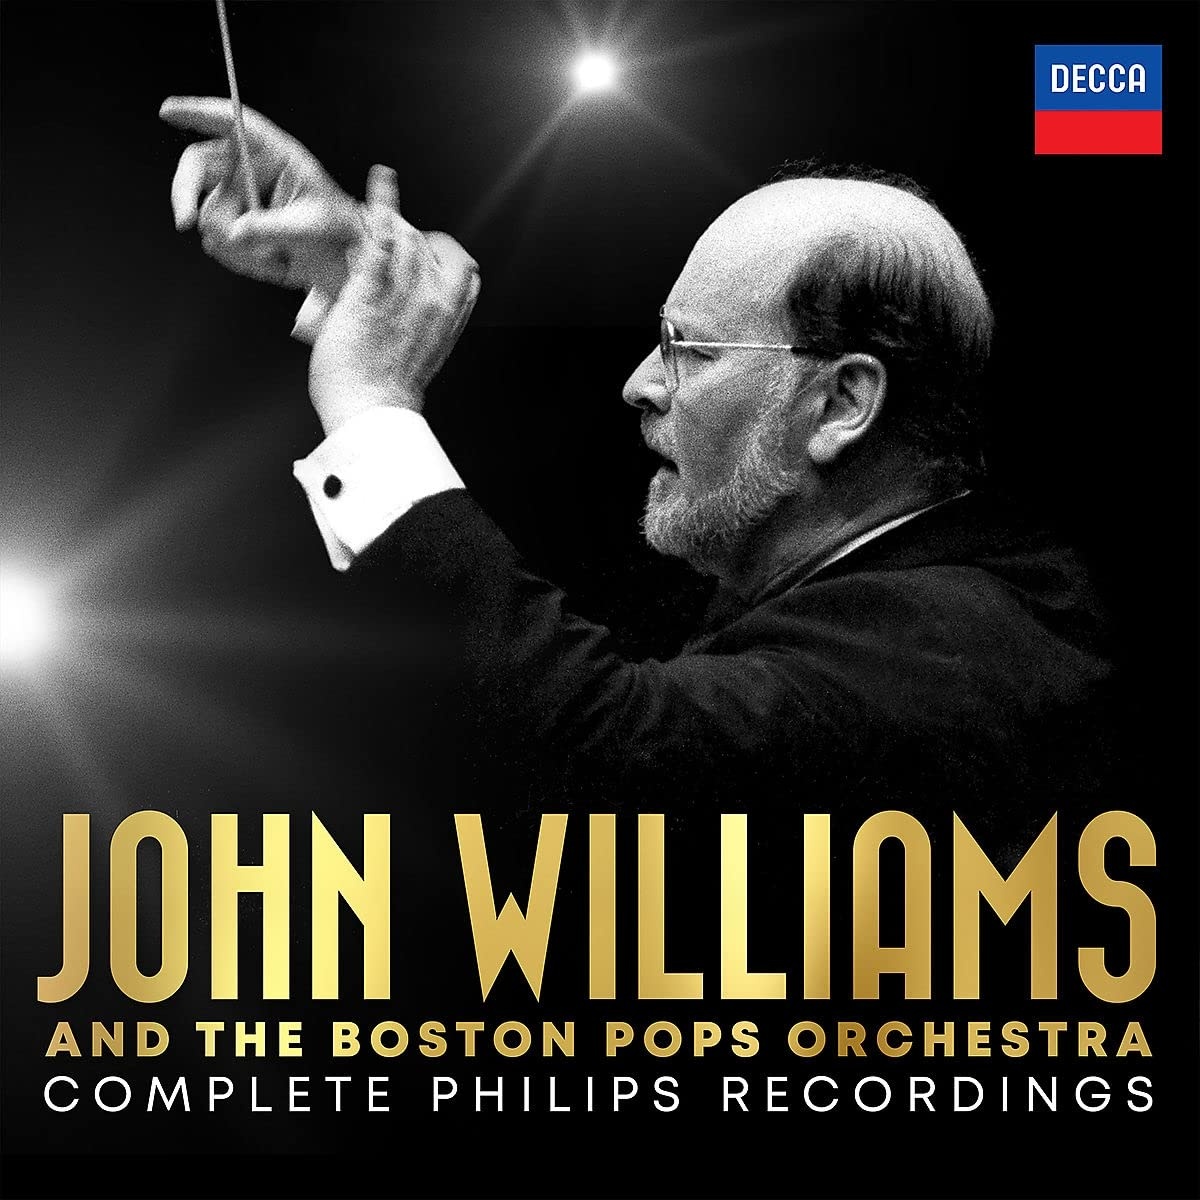 The orchestra complete. Philips records. CD John Williams and Boston Pops.